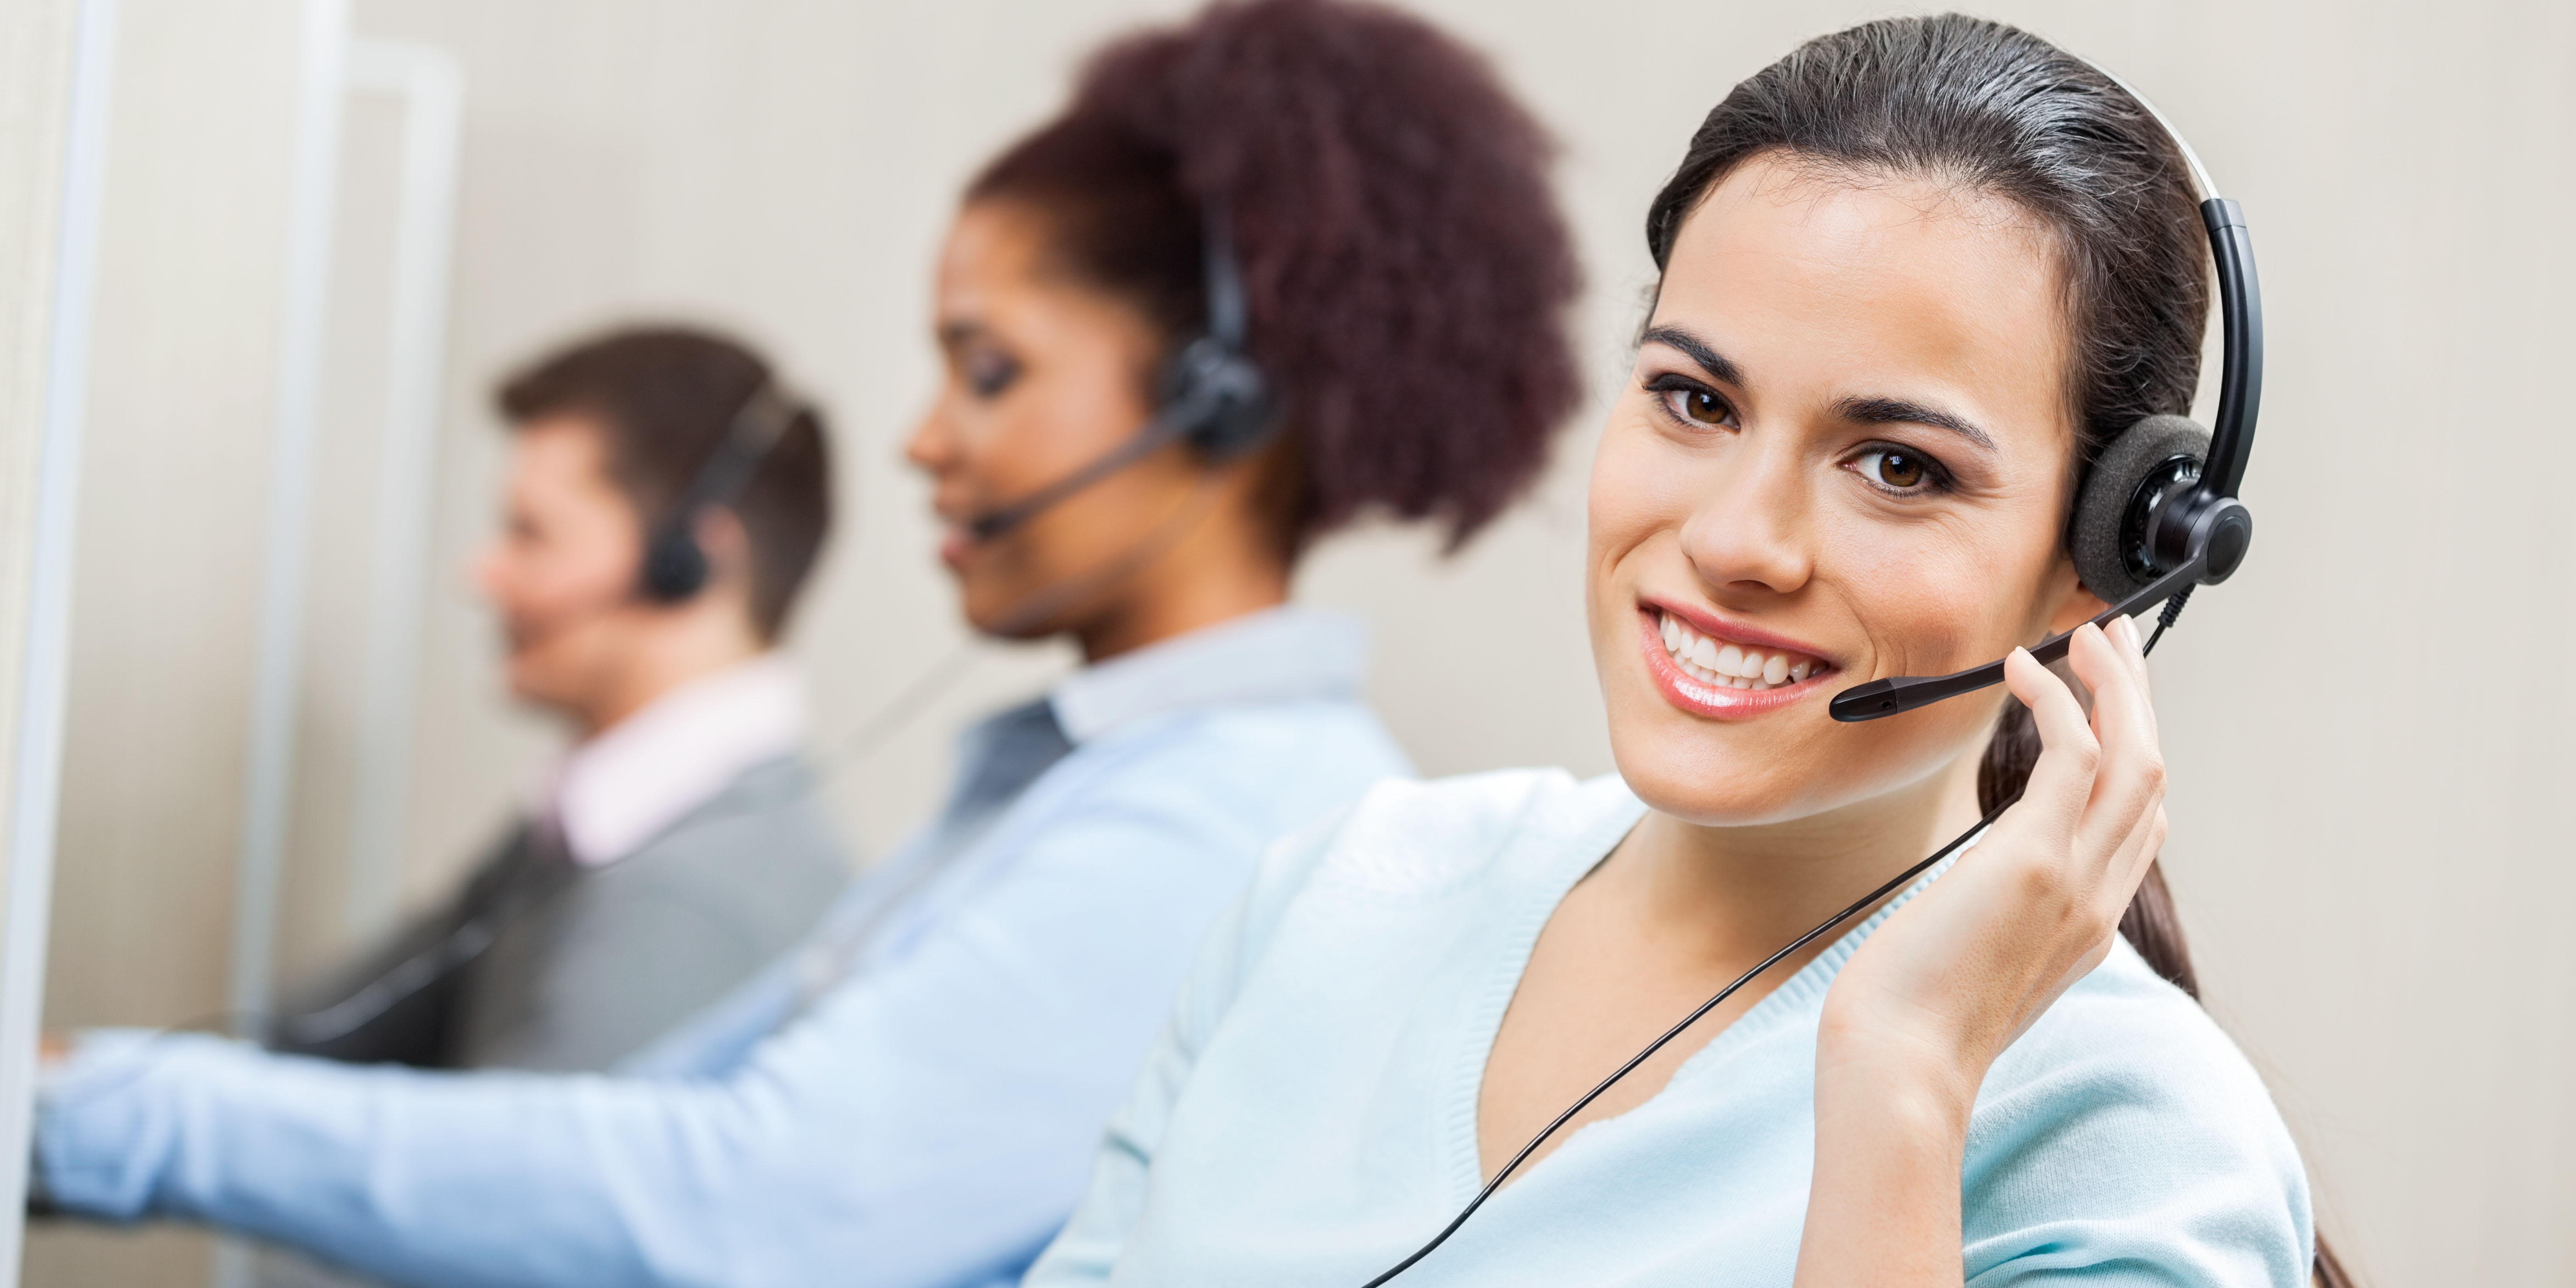 Portrait of smiling female customer service agent wearing headset with colleagues working in background at office